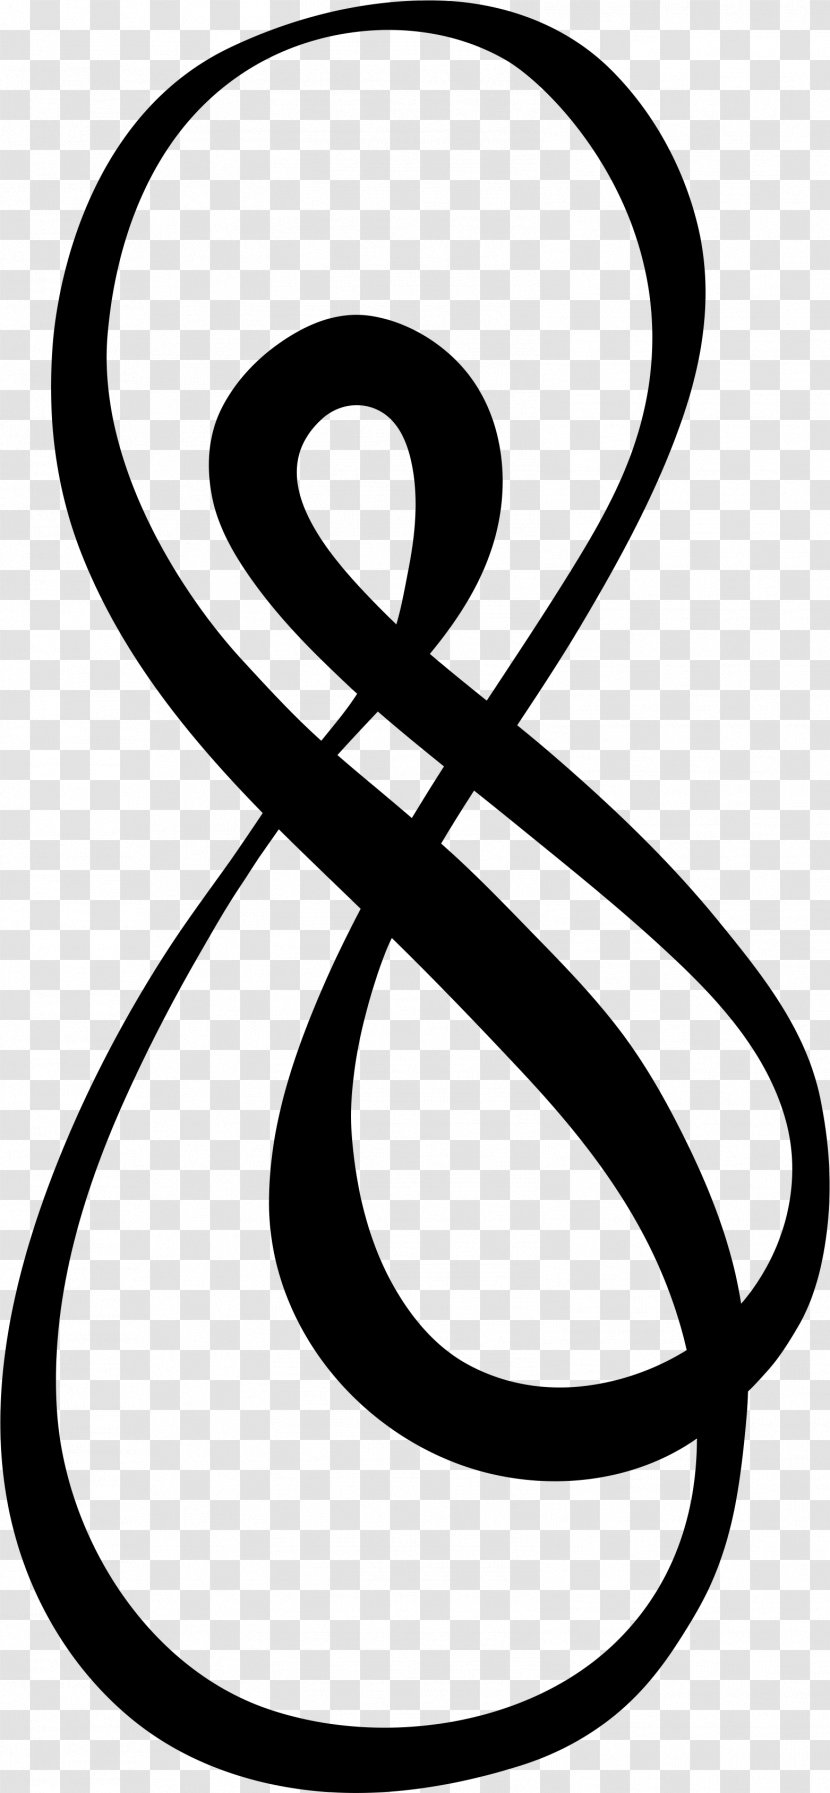 Clip Art Infinity Symbol Tattoo The Sommer Group Counseling & Consulting - Line Transparent PNG